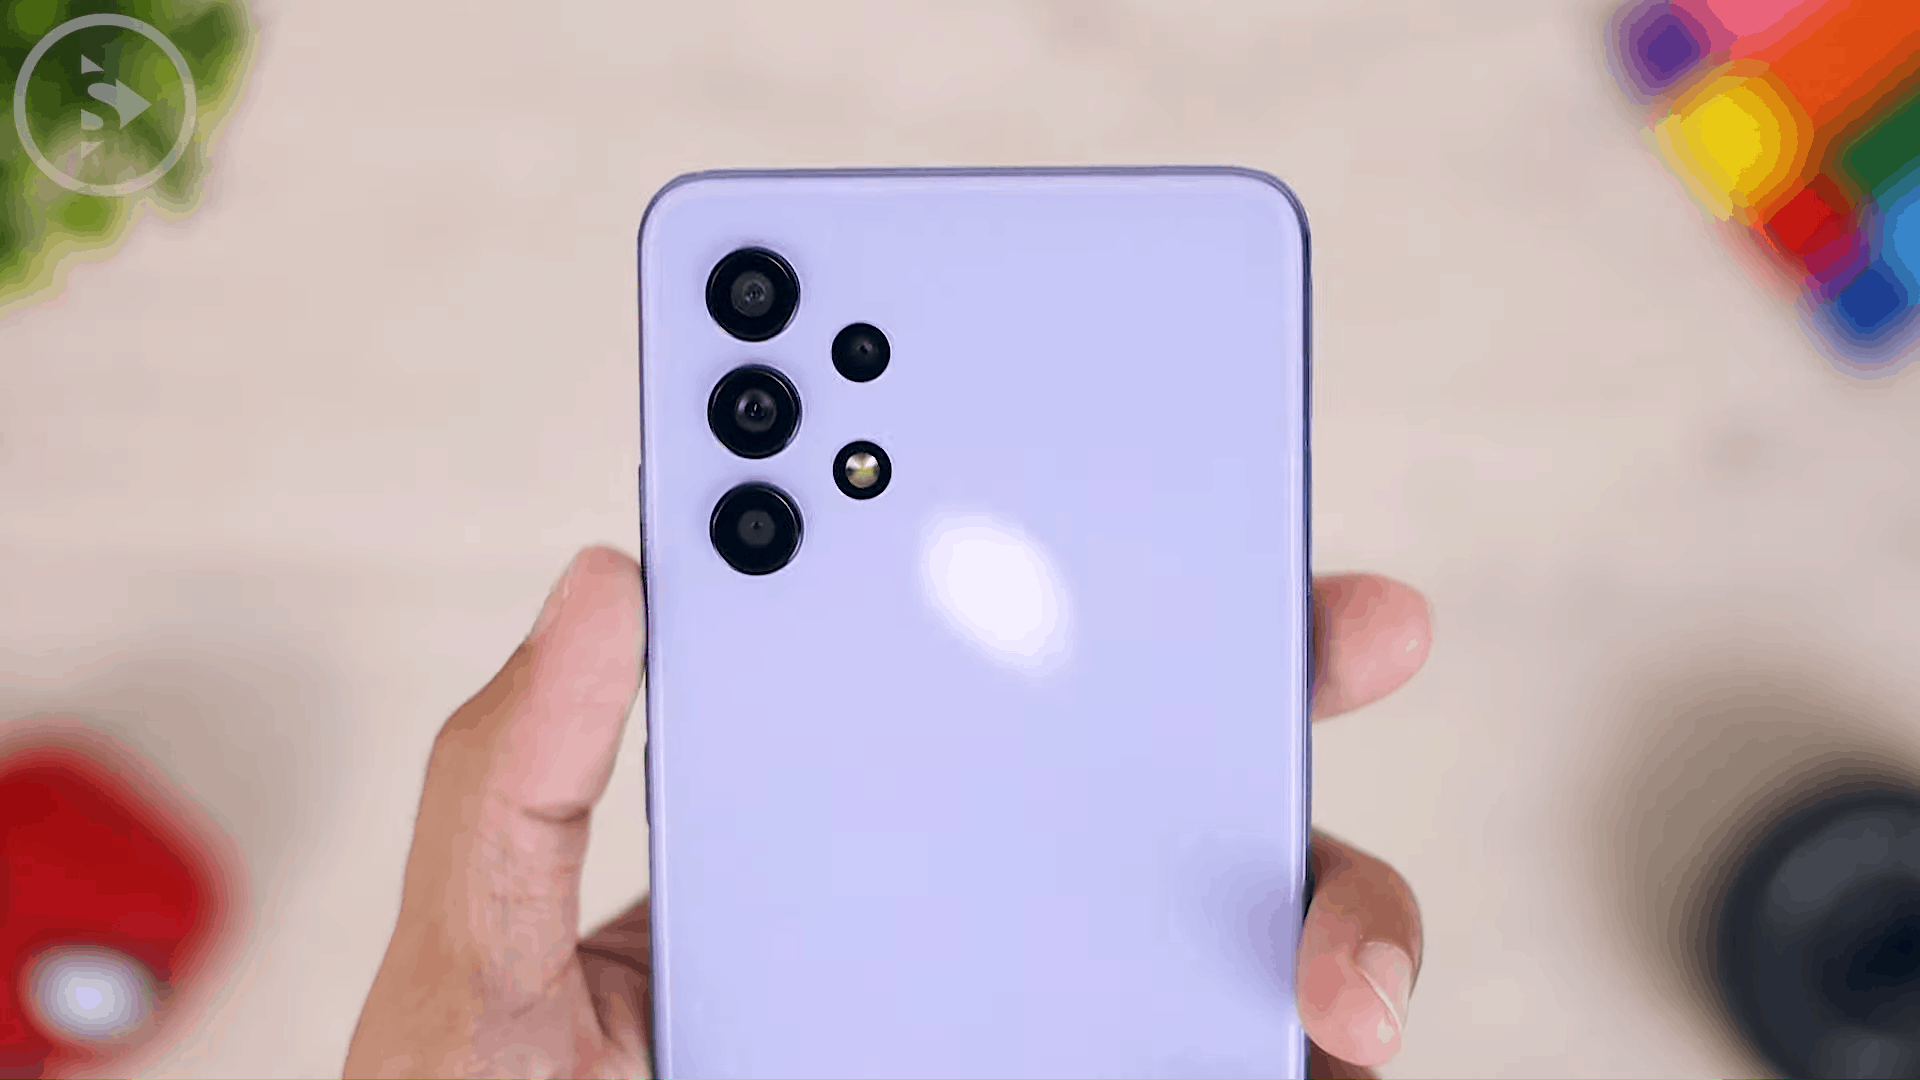 Camera and Back Frame Design on Samsung A32 - Unboxing Samsung Galaxy A32 90Hz AMOLED screen, 5000mAH battery and 64MP Camera